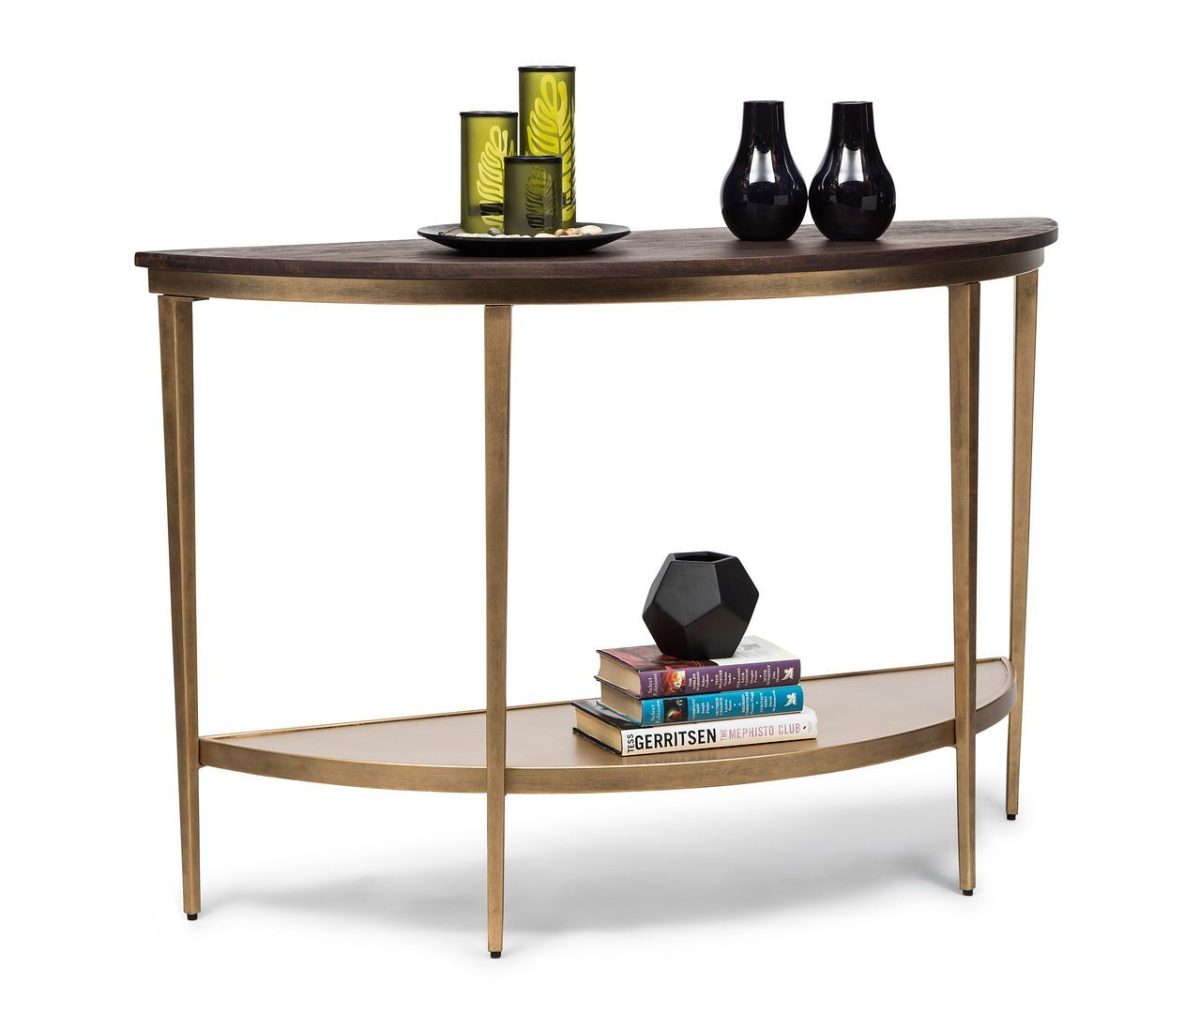 Dark French Brass Half Round Hallway Console Table with Wood Top